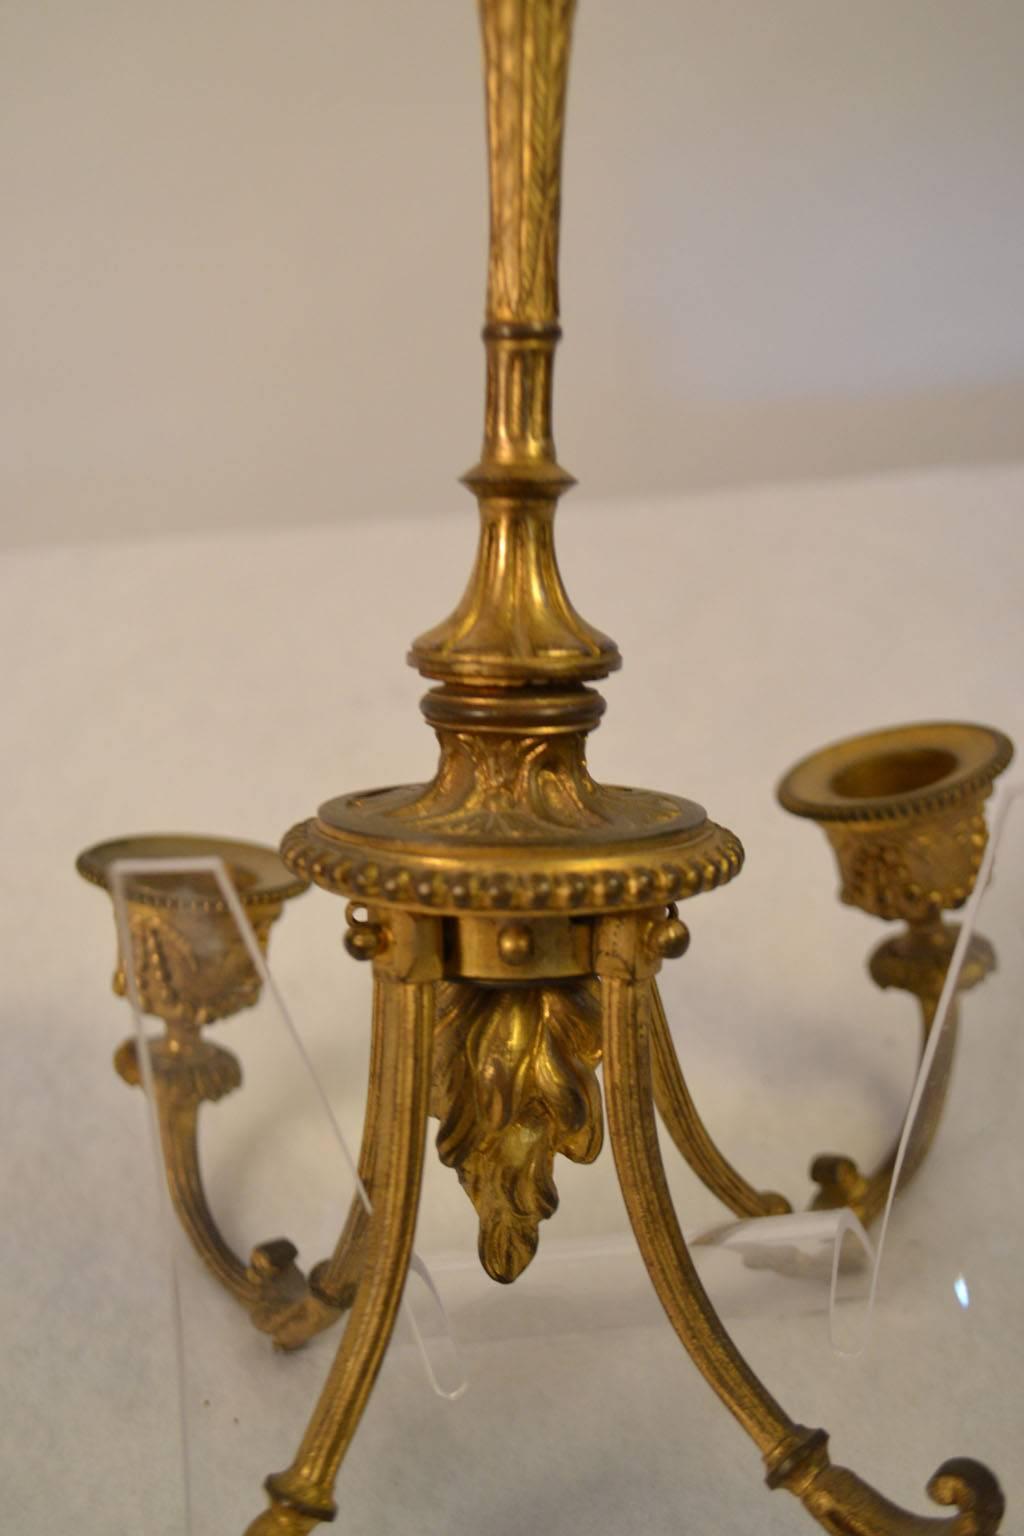 Small hanging bronze light fixture in Louis XVI style.